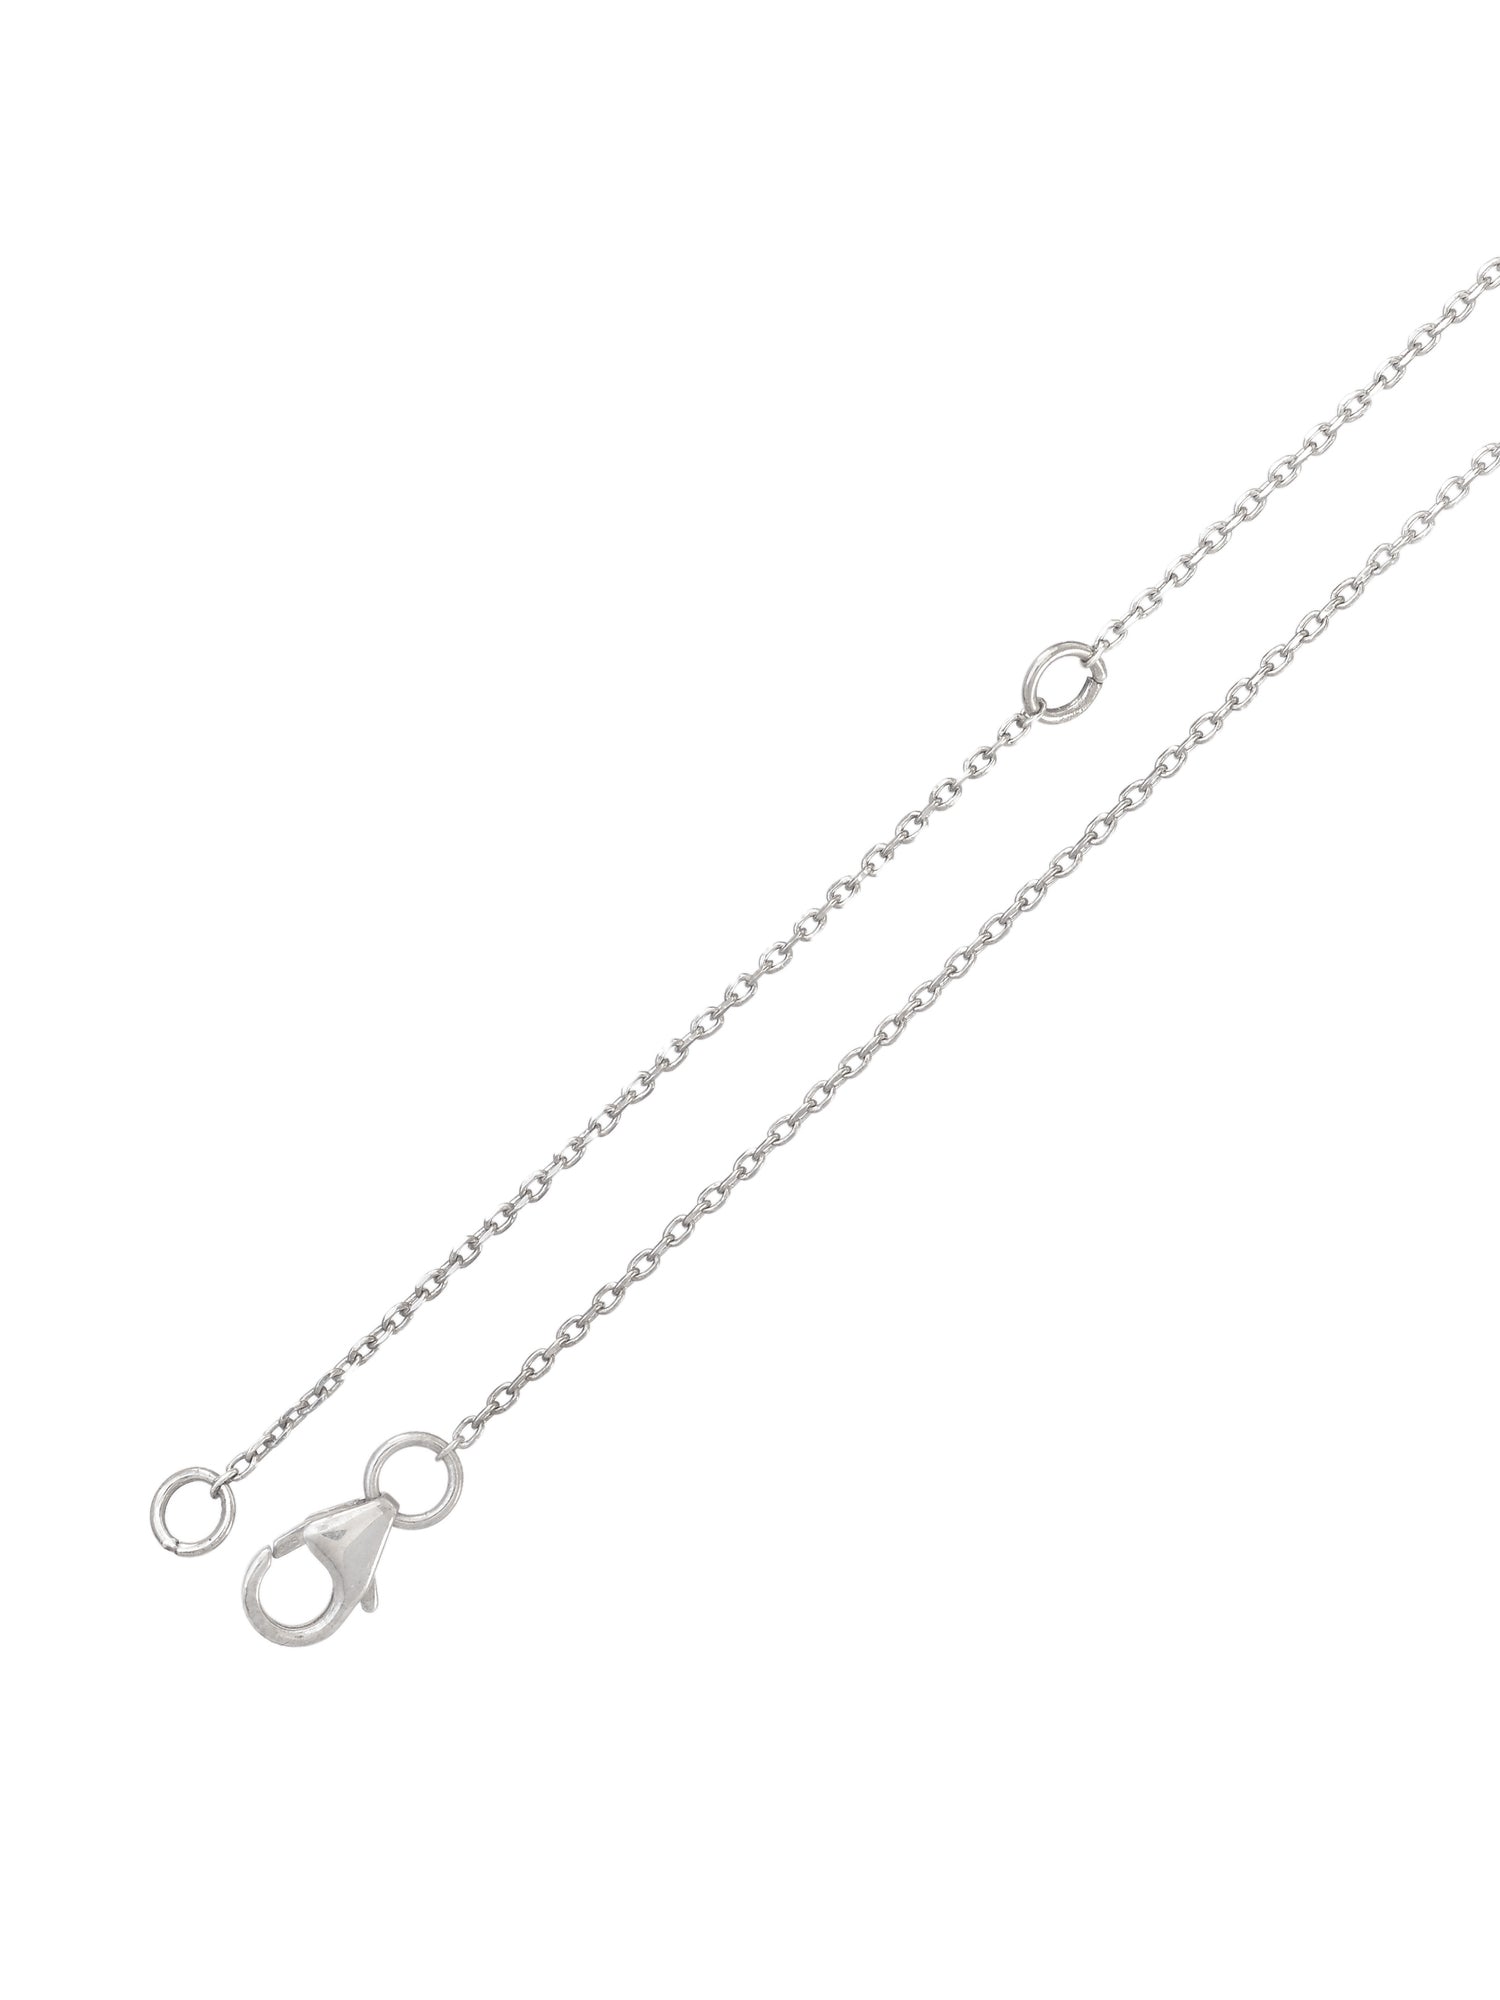 925 STERLING SILVER MAMA PENDANT NECKLACE WITH CHAIN-4